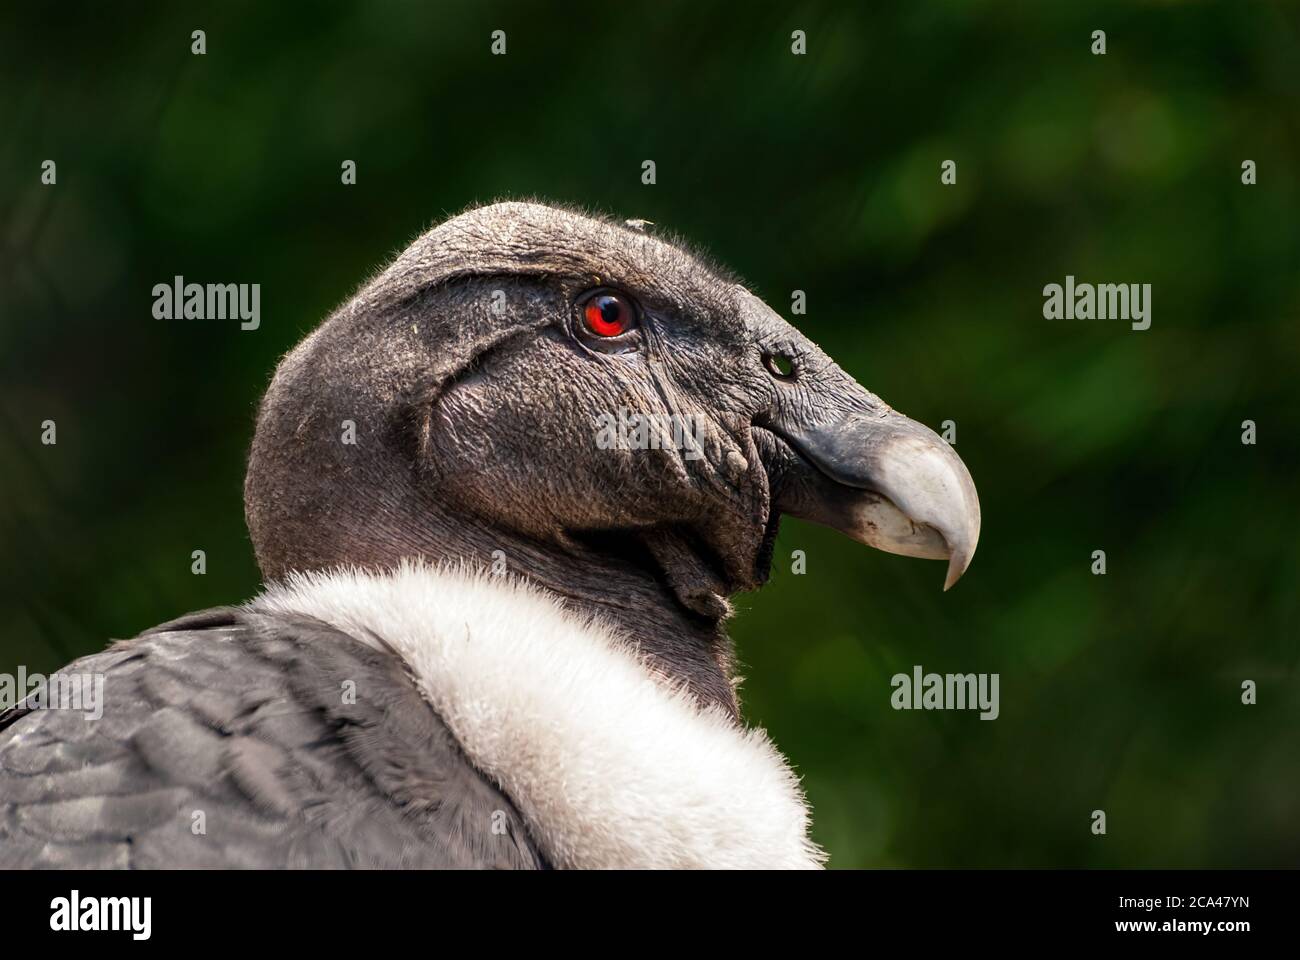 The Andean condor (Vultur gryphus) is a South American bird in the New World vulture family Cathartidae and is the only member of the genus Vultur. Stock Photo